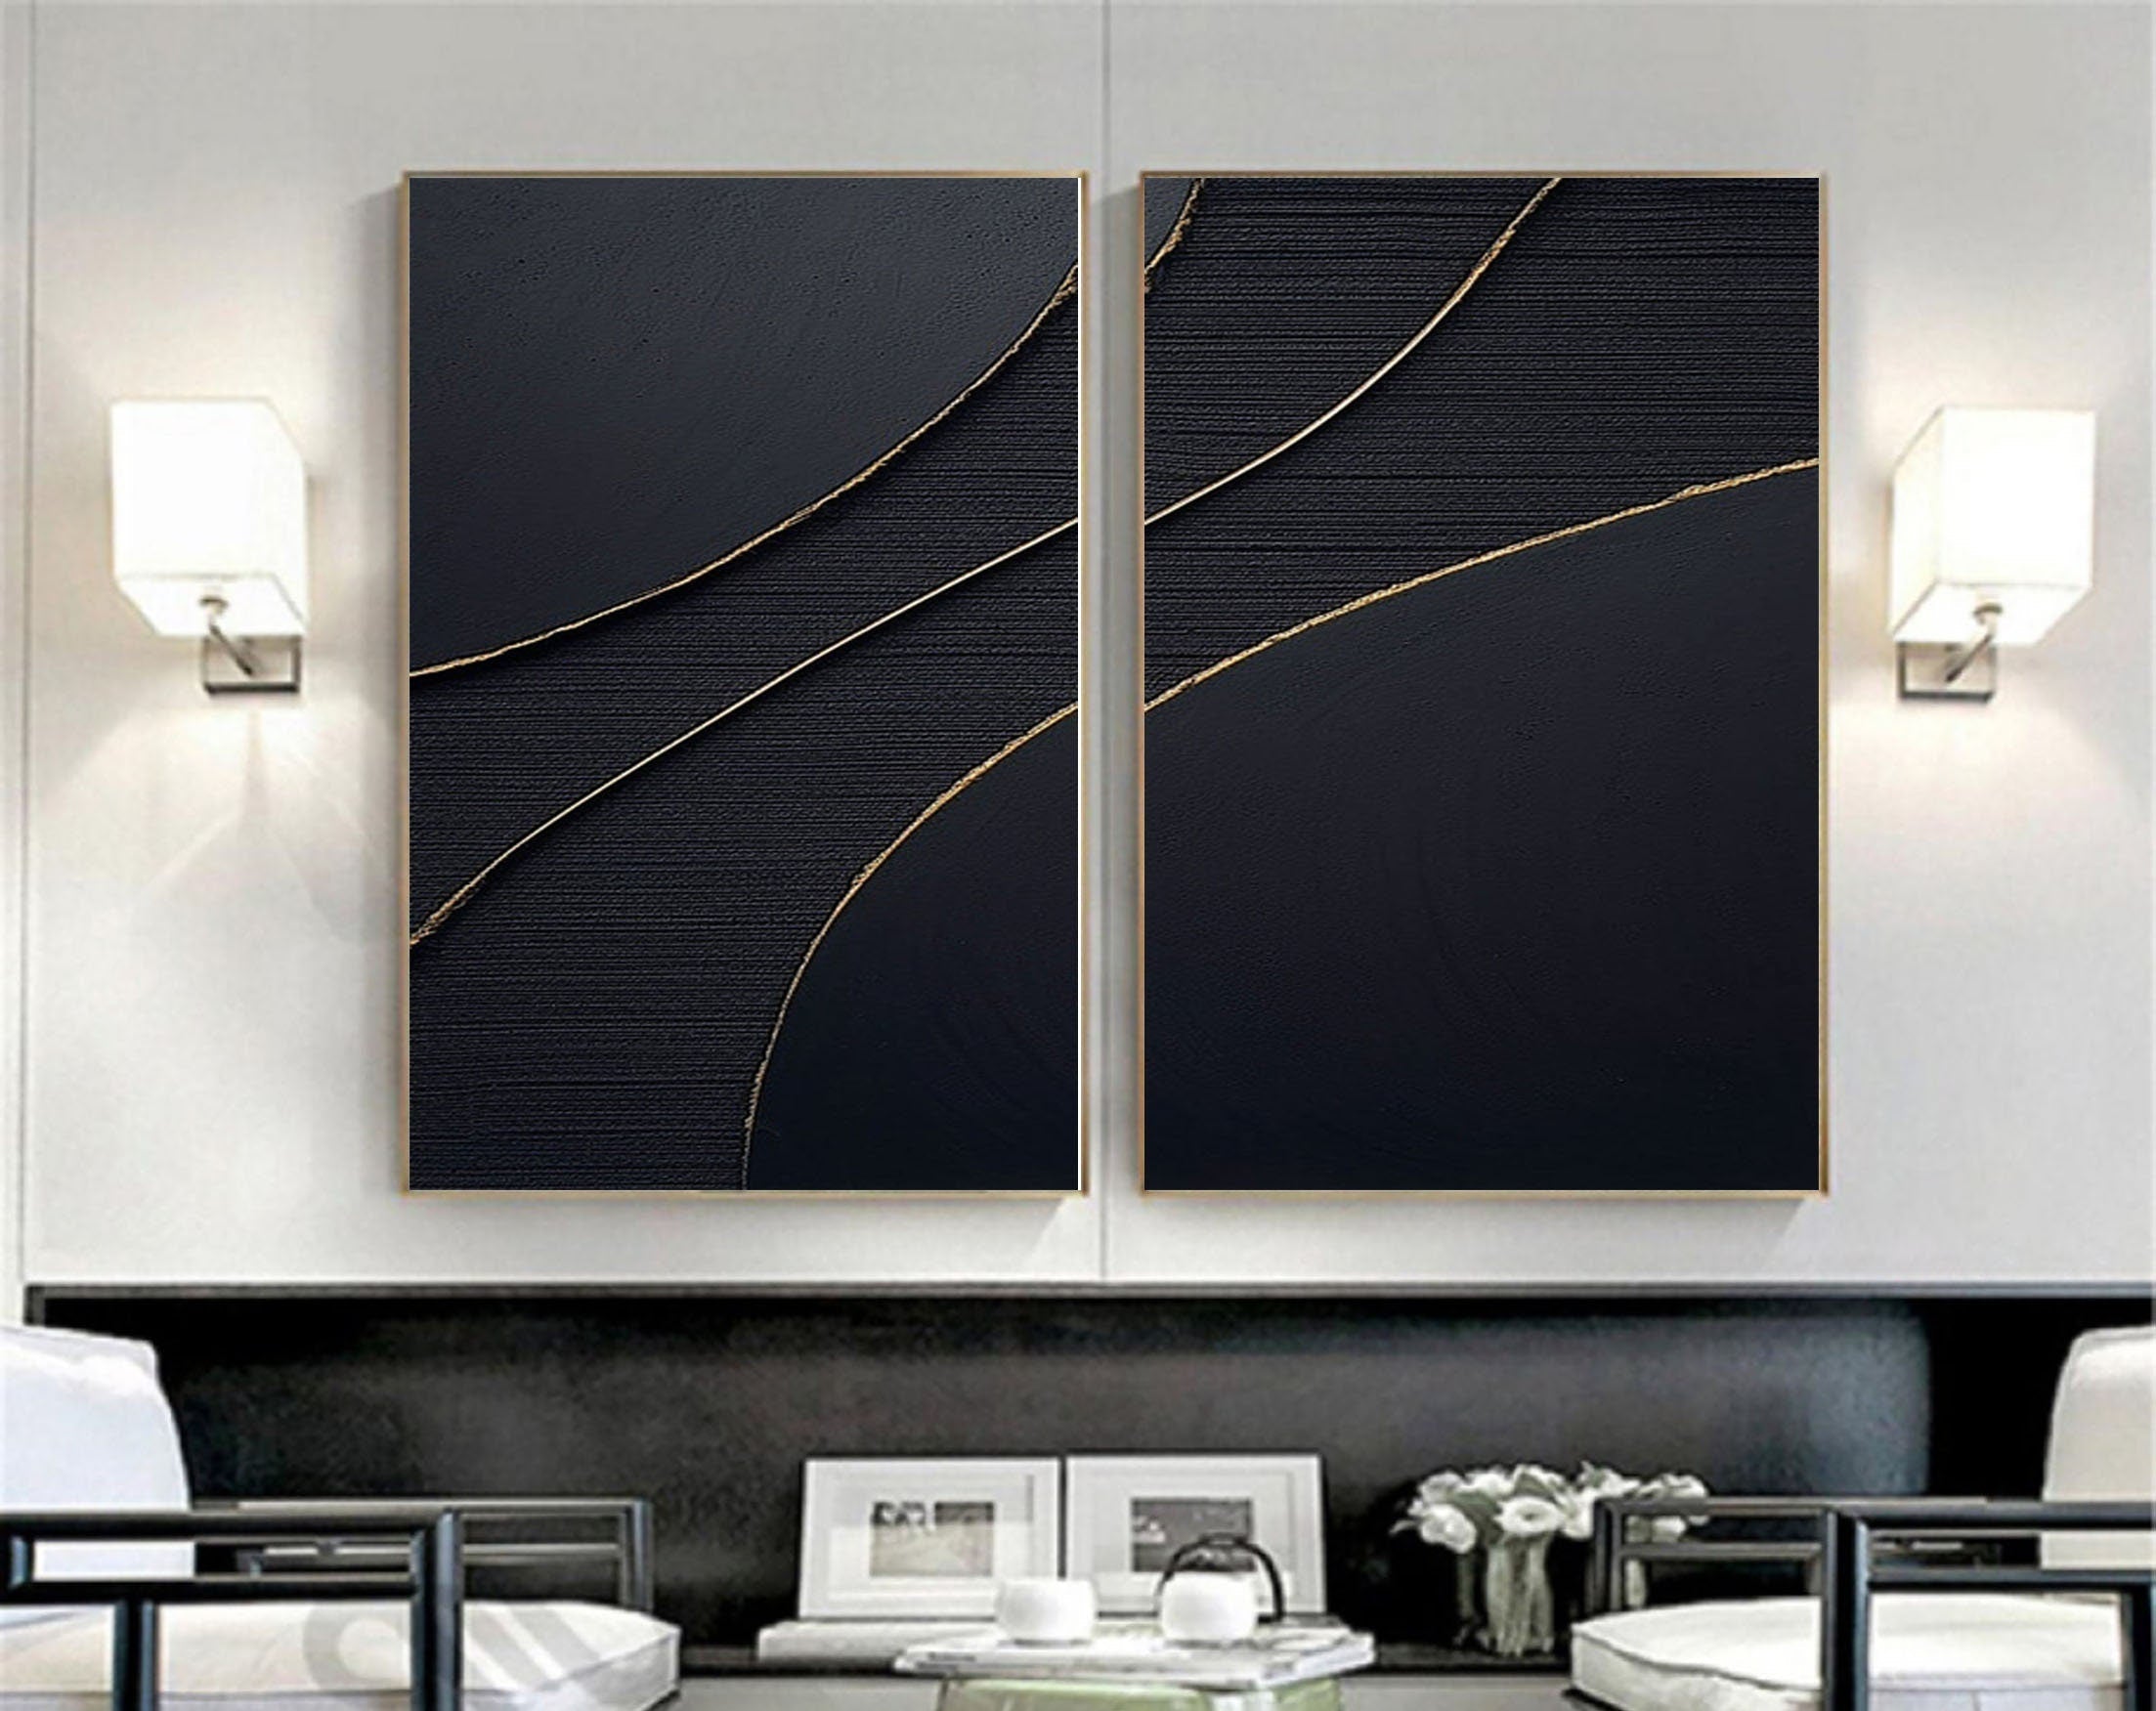 Gold Black Textured Minimalist Wall Art, Large Abstract Painting On Canvas